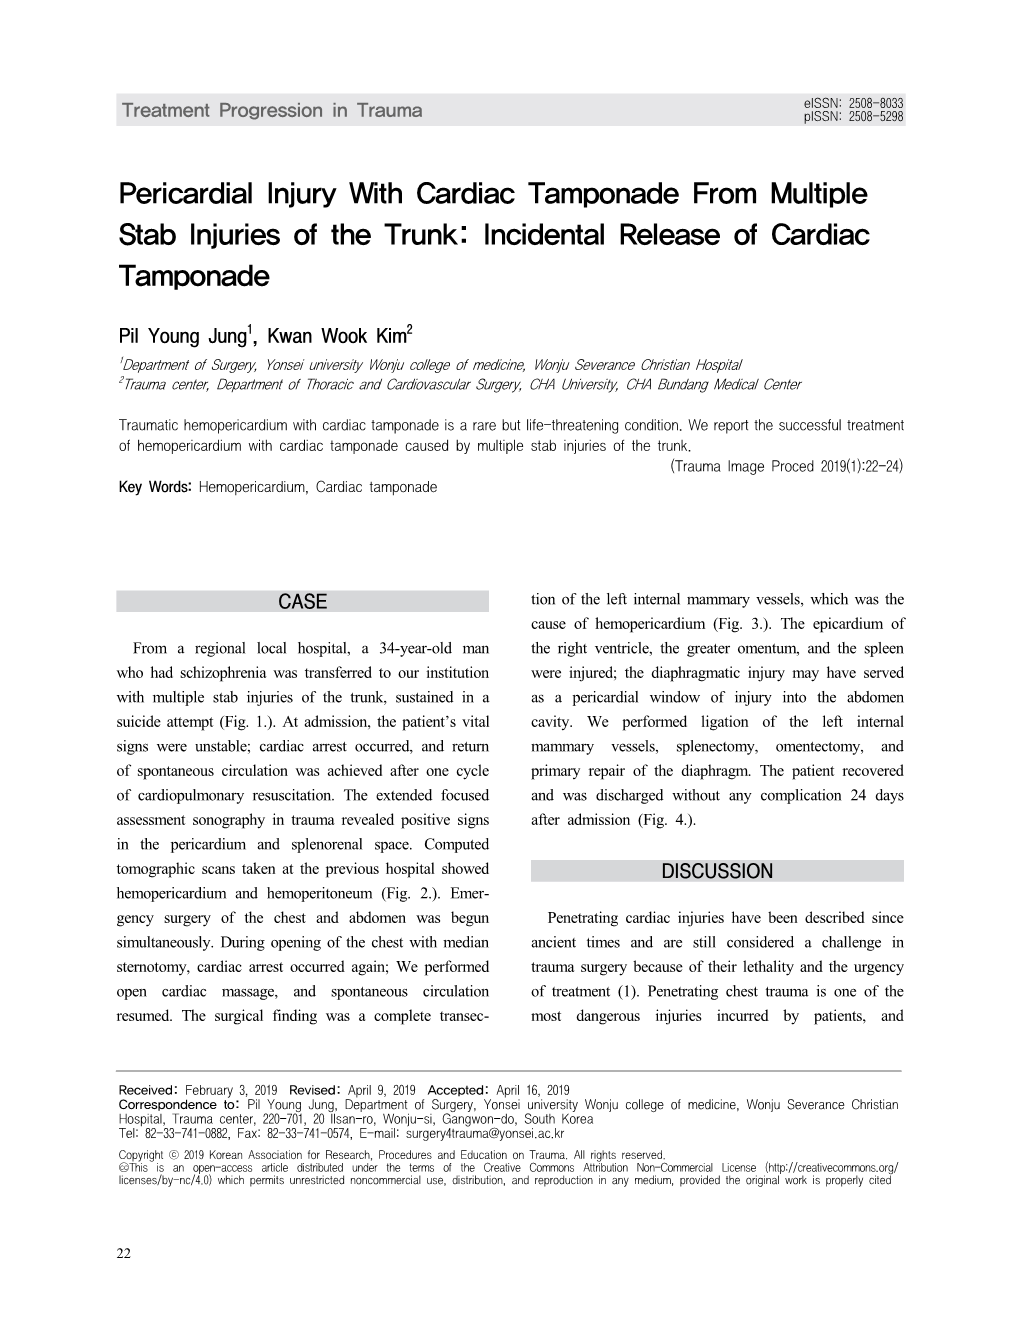 Pericardial Injury with Cardiac Tamponade from Multiple Stab Injuries of the Trunk: Incidental Release of Cardiac Tamponade